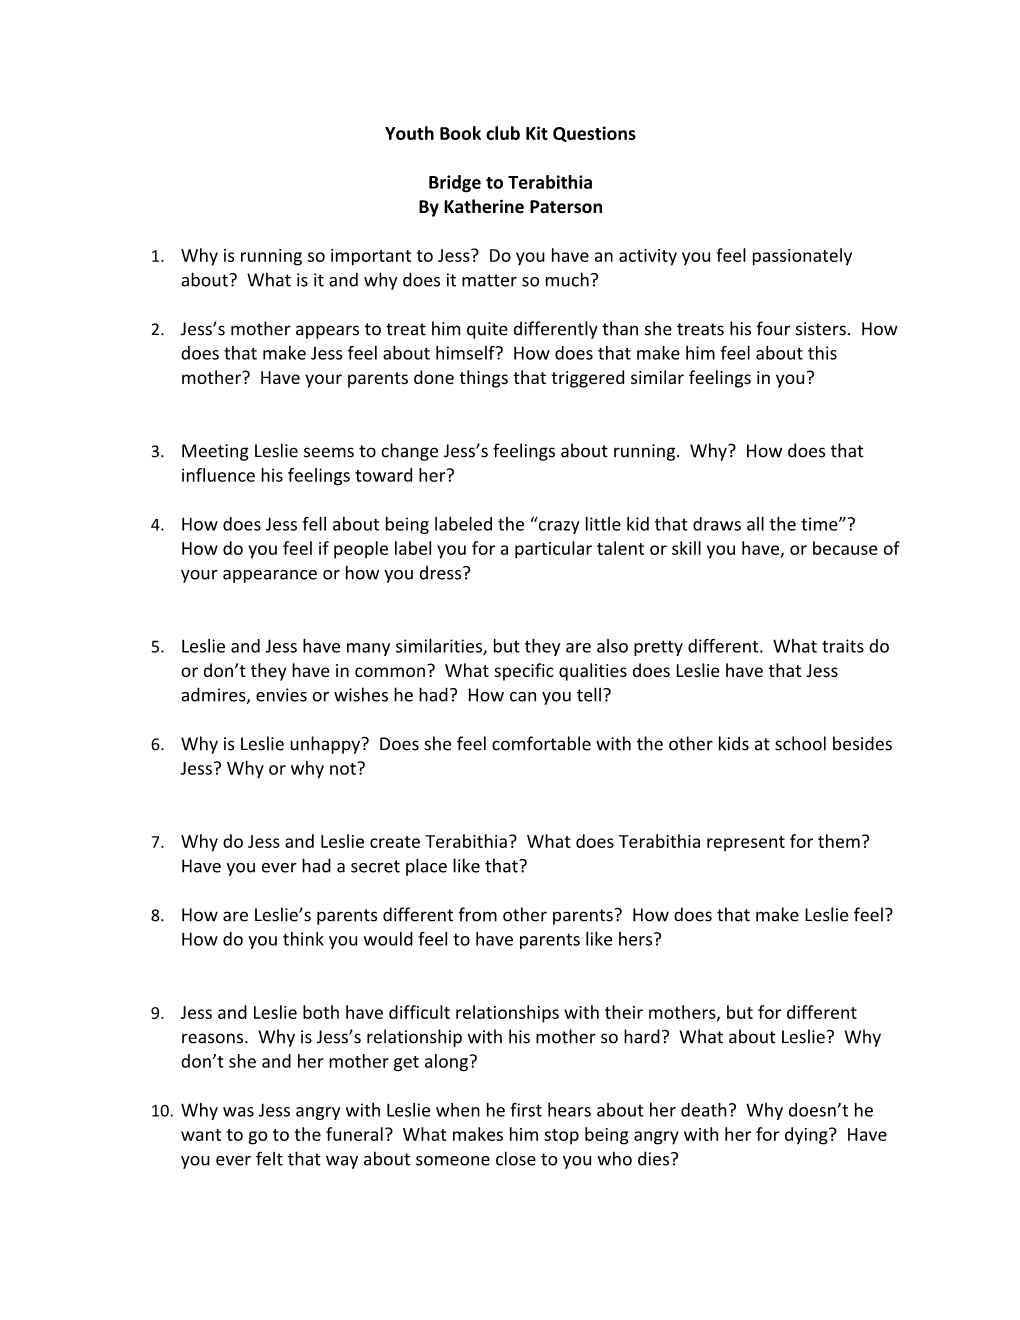 Youth Book Club Kit Questions s4